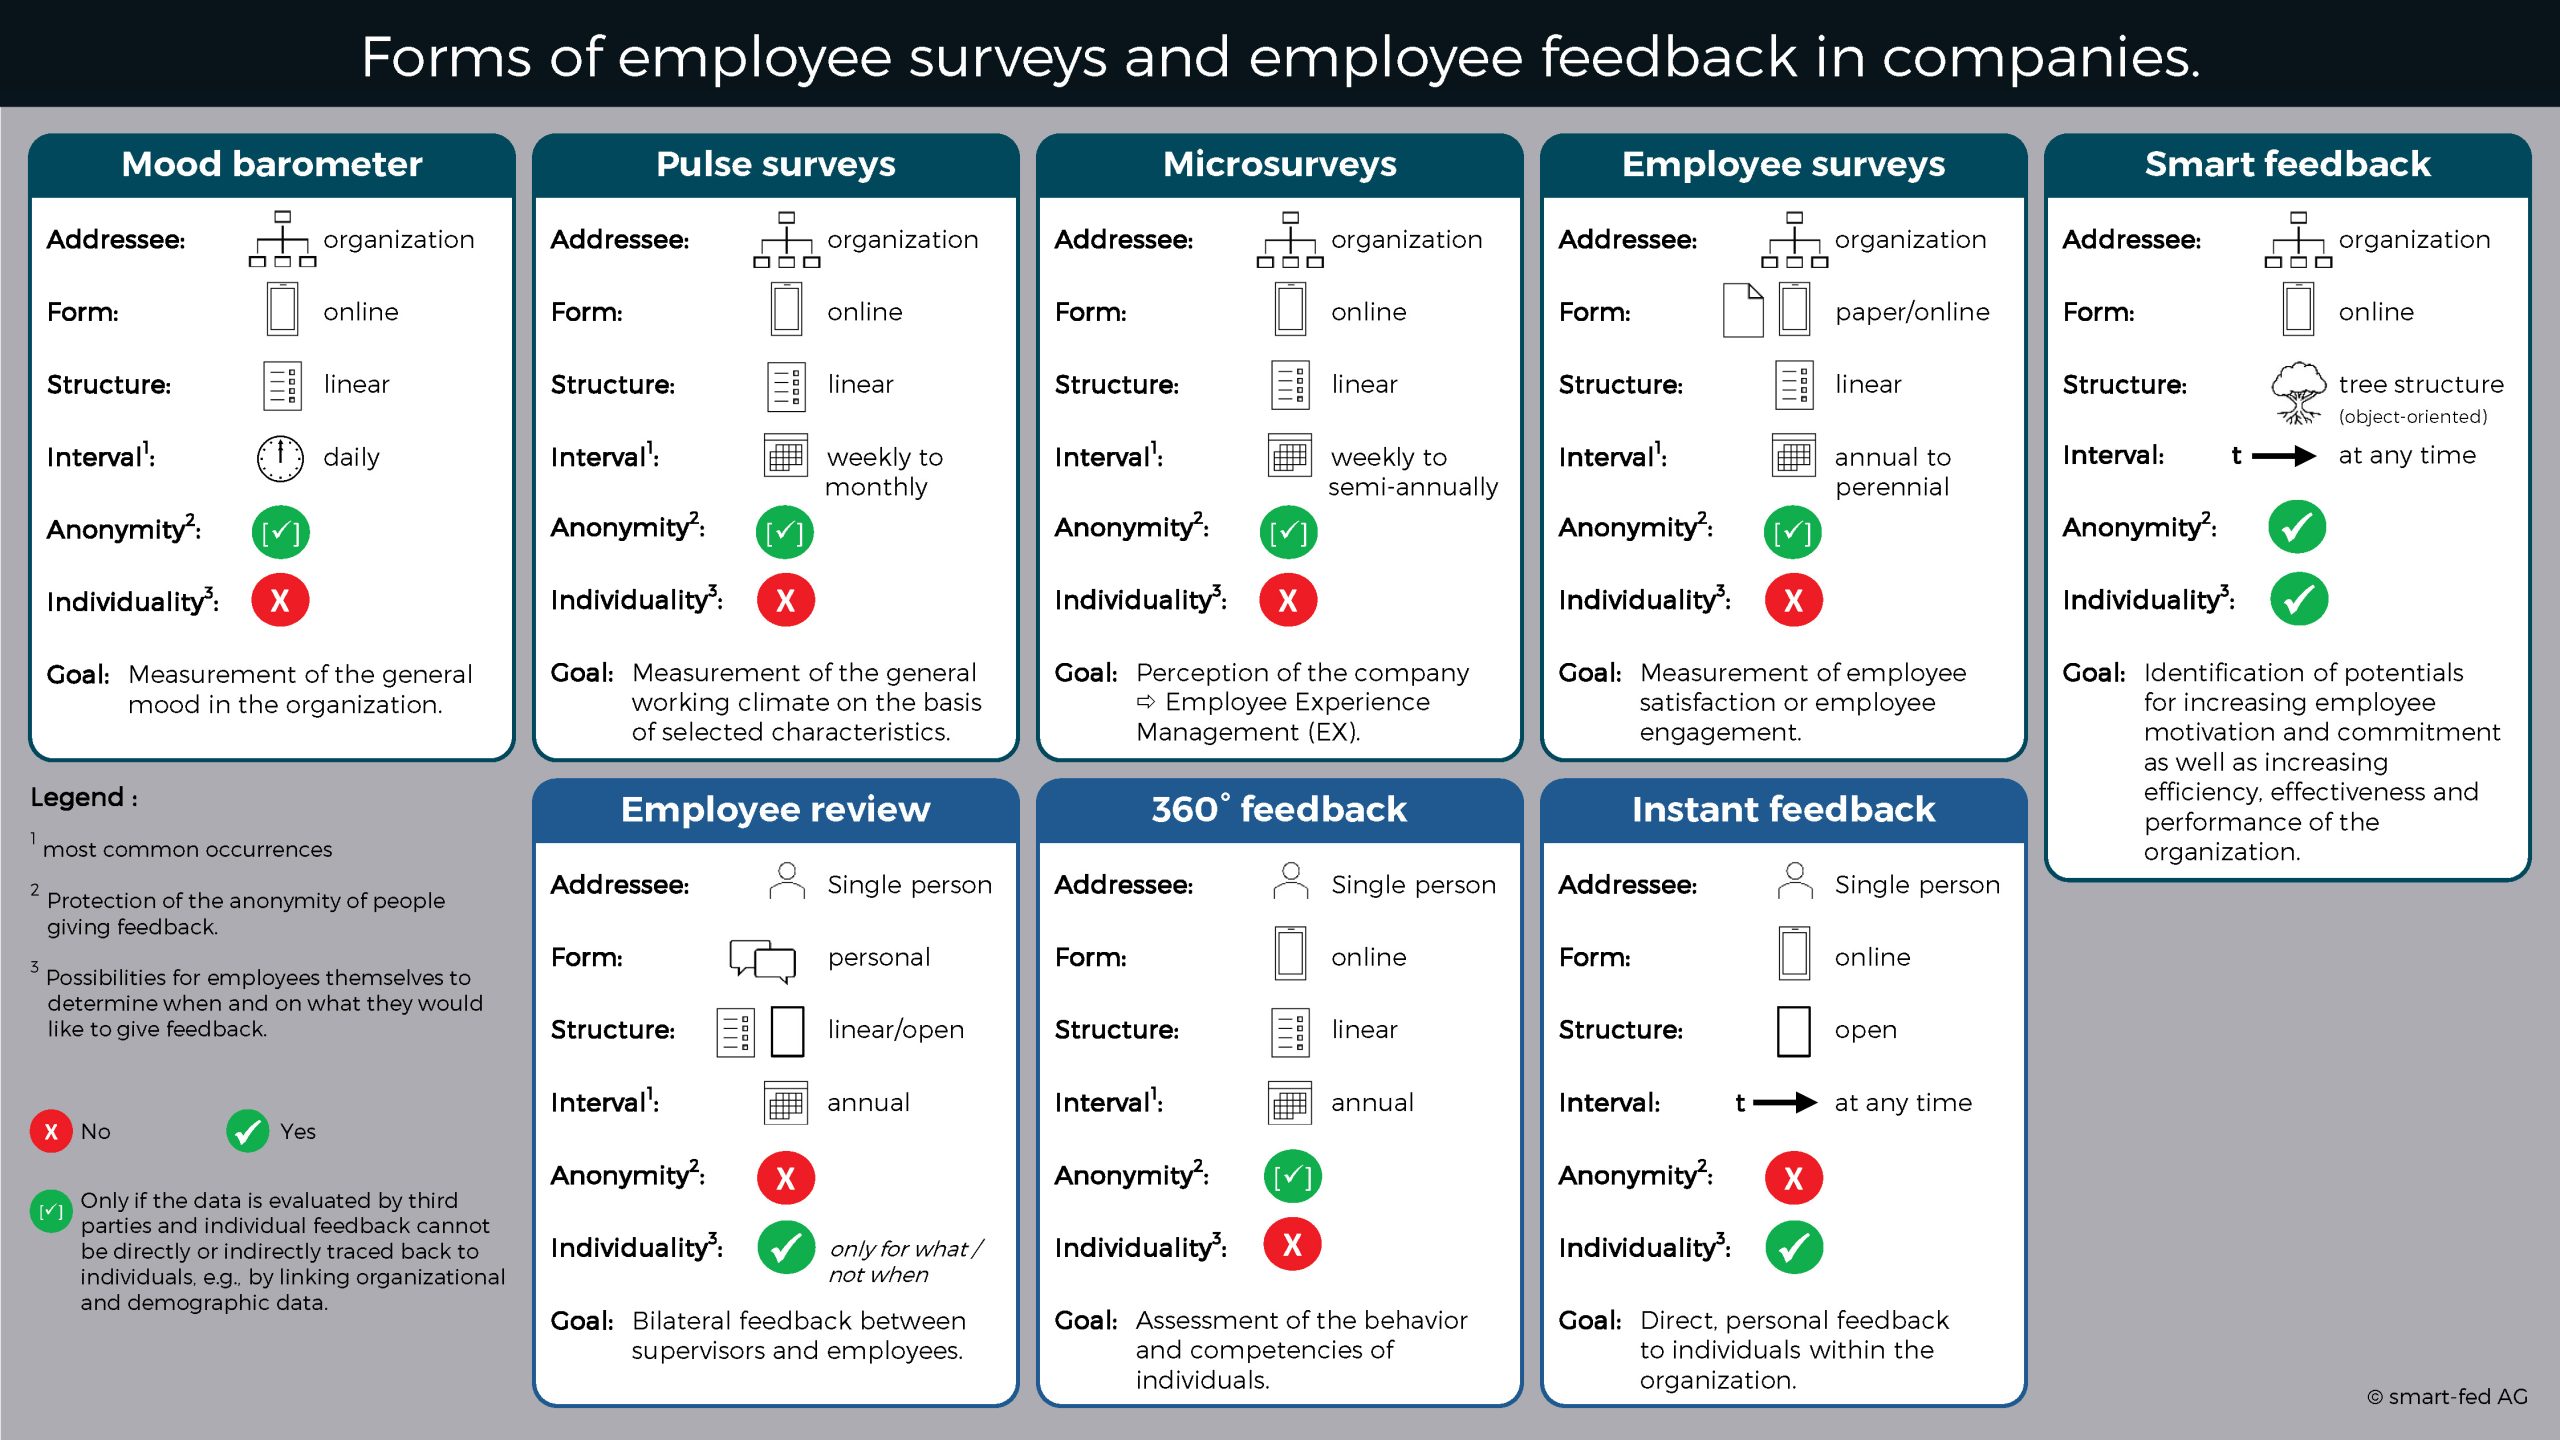 Forms of employee surveys and employee feedback in companies